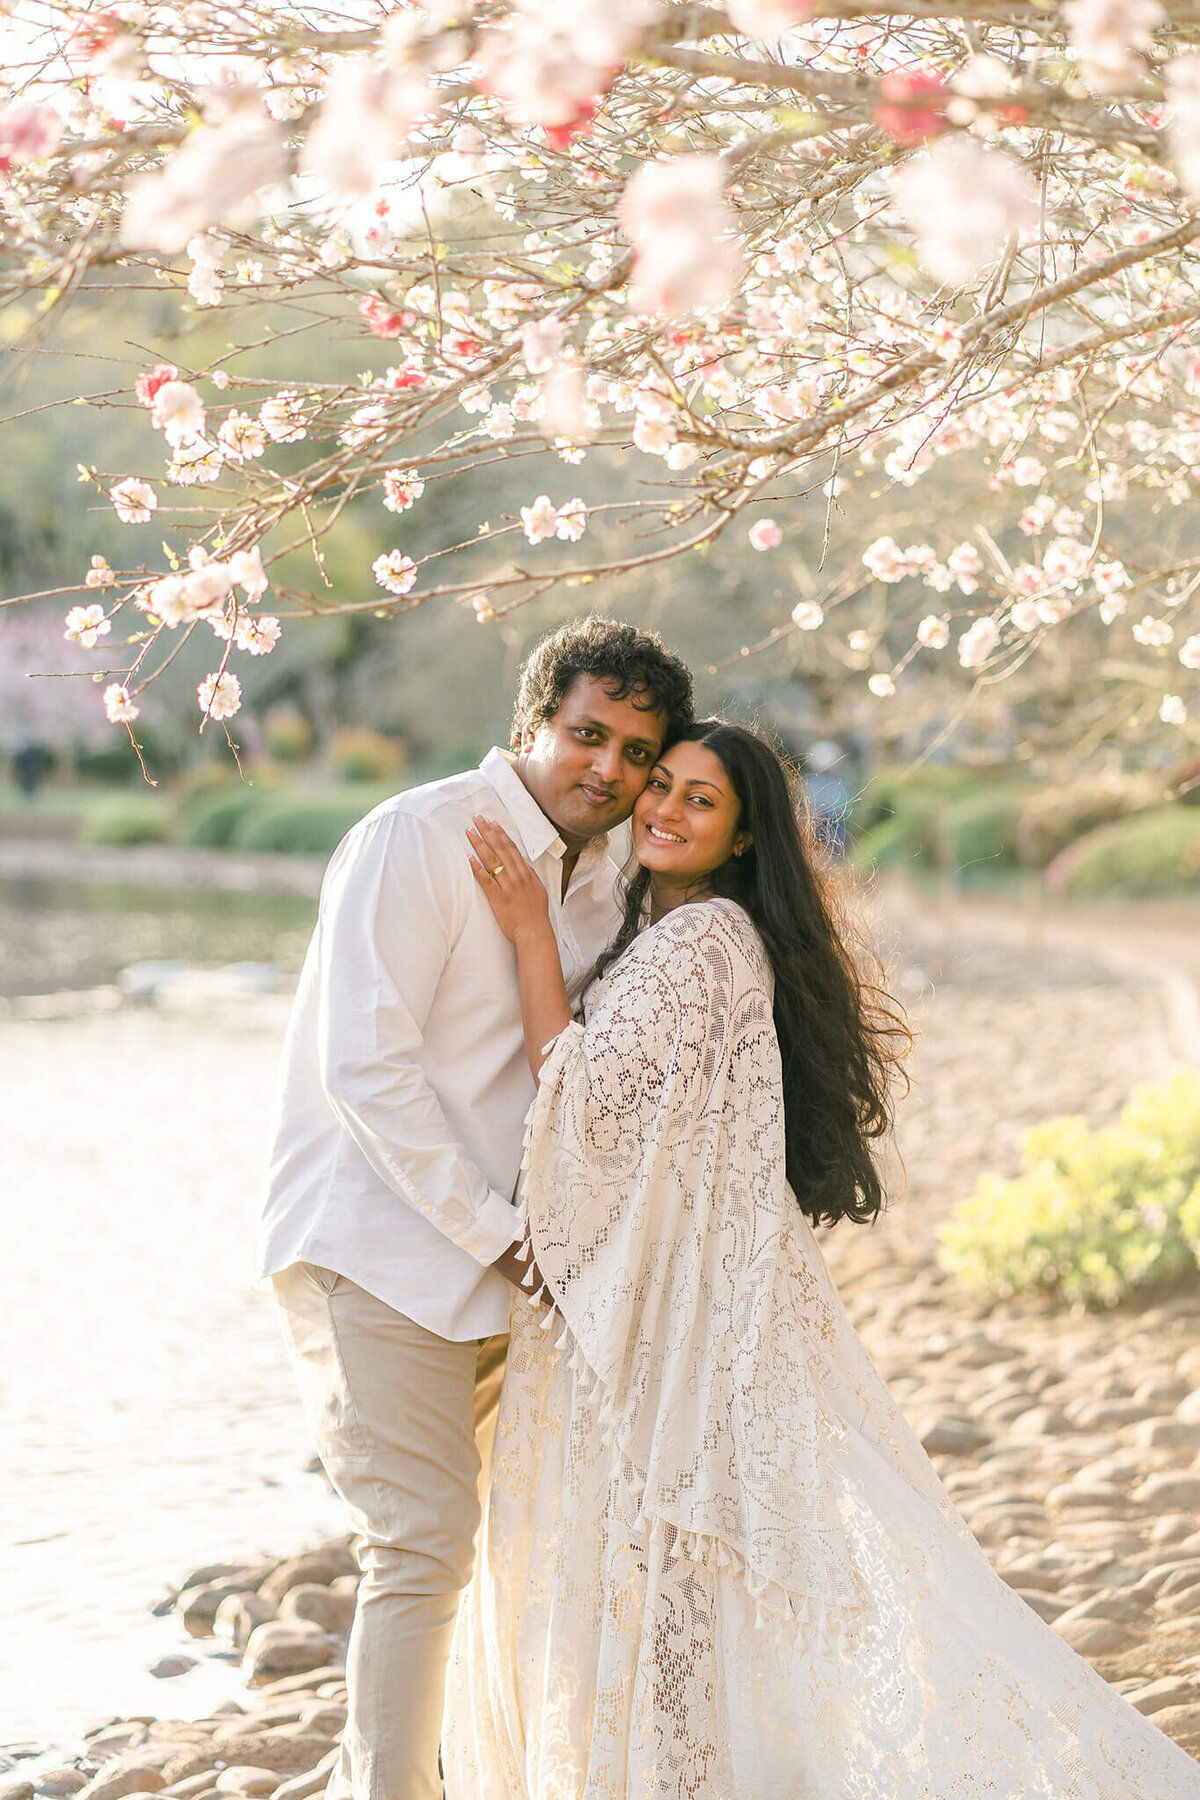 Couple having maternity photos done at Brisbane's cherry blossom garden, candid lifestyle photography by hikari lifestyle photography.